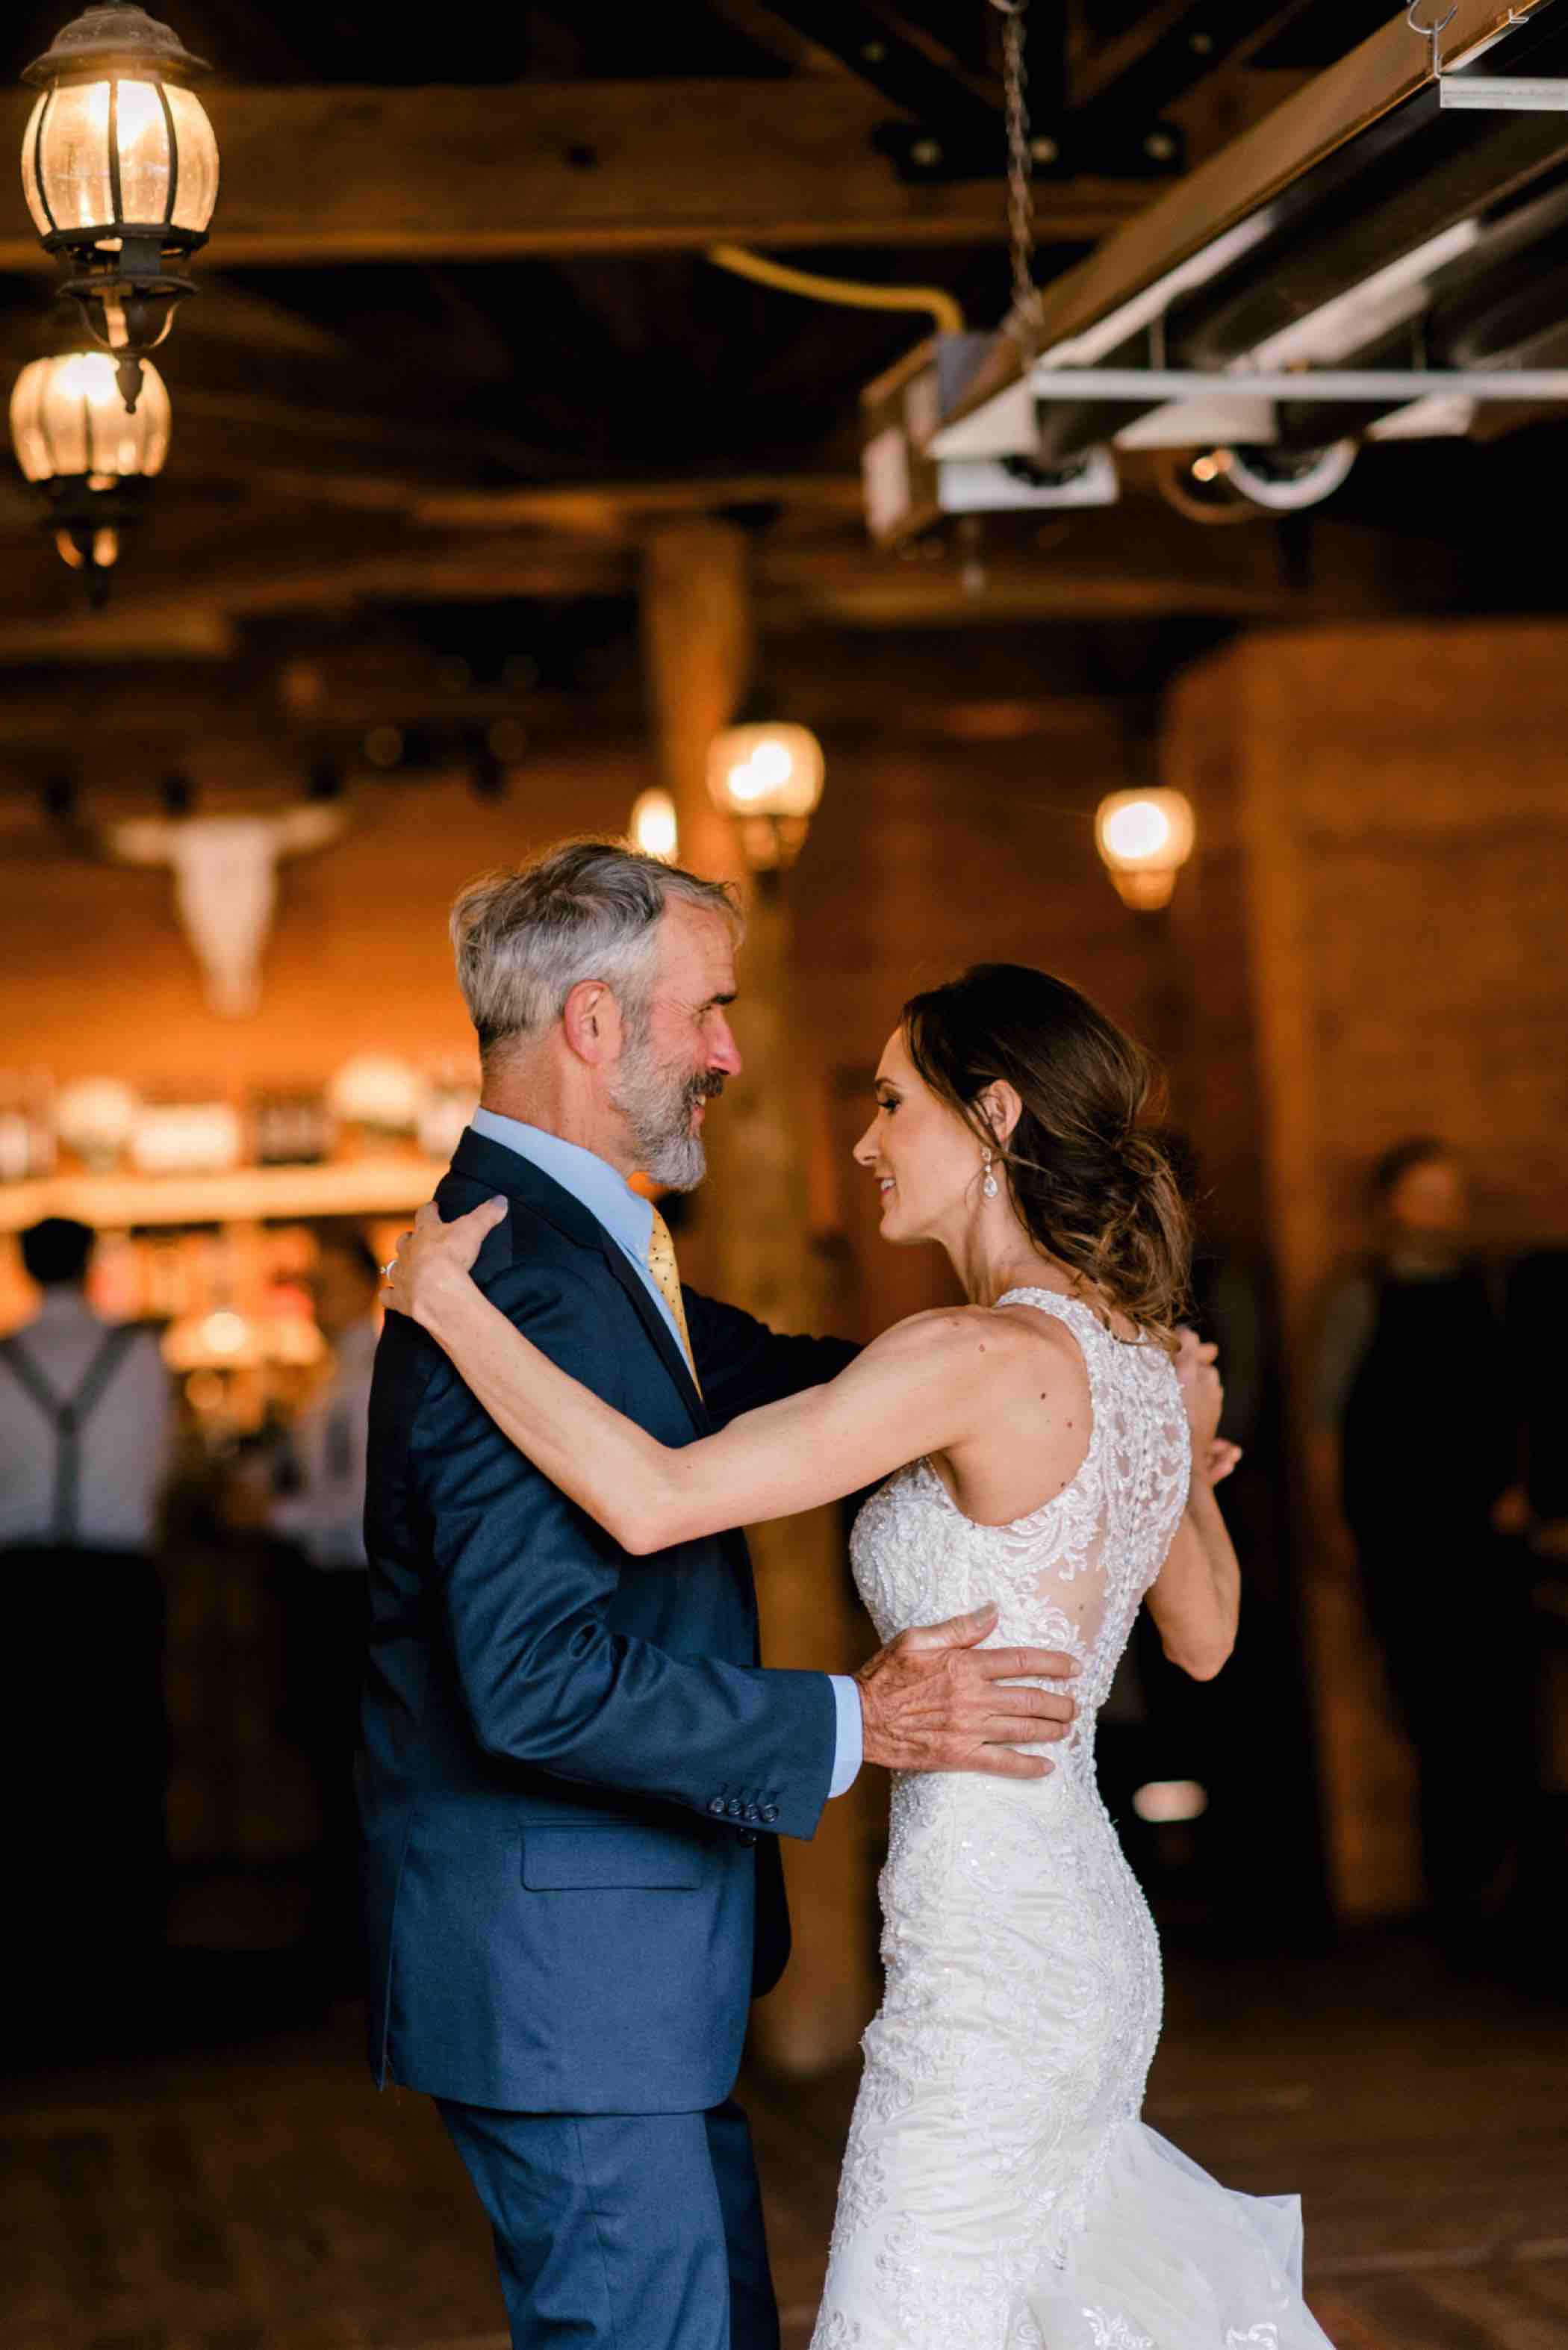 Father daughter dance at Piney River Ranch in Vail Colorado. Photo by Ali and Garrett, Romantic, Adventurous, Nostalgic Wedding Photographers.